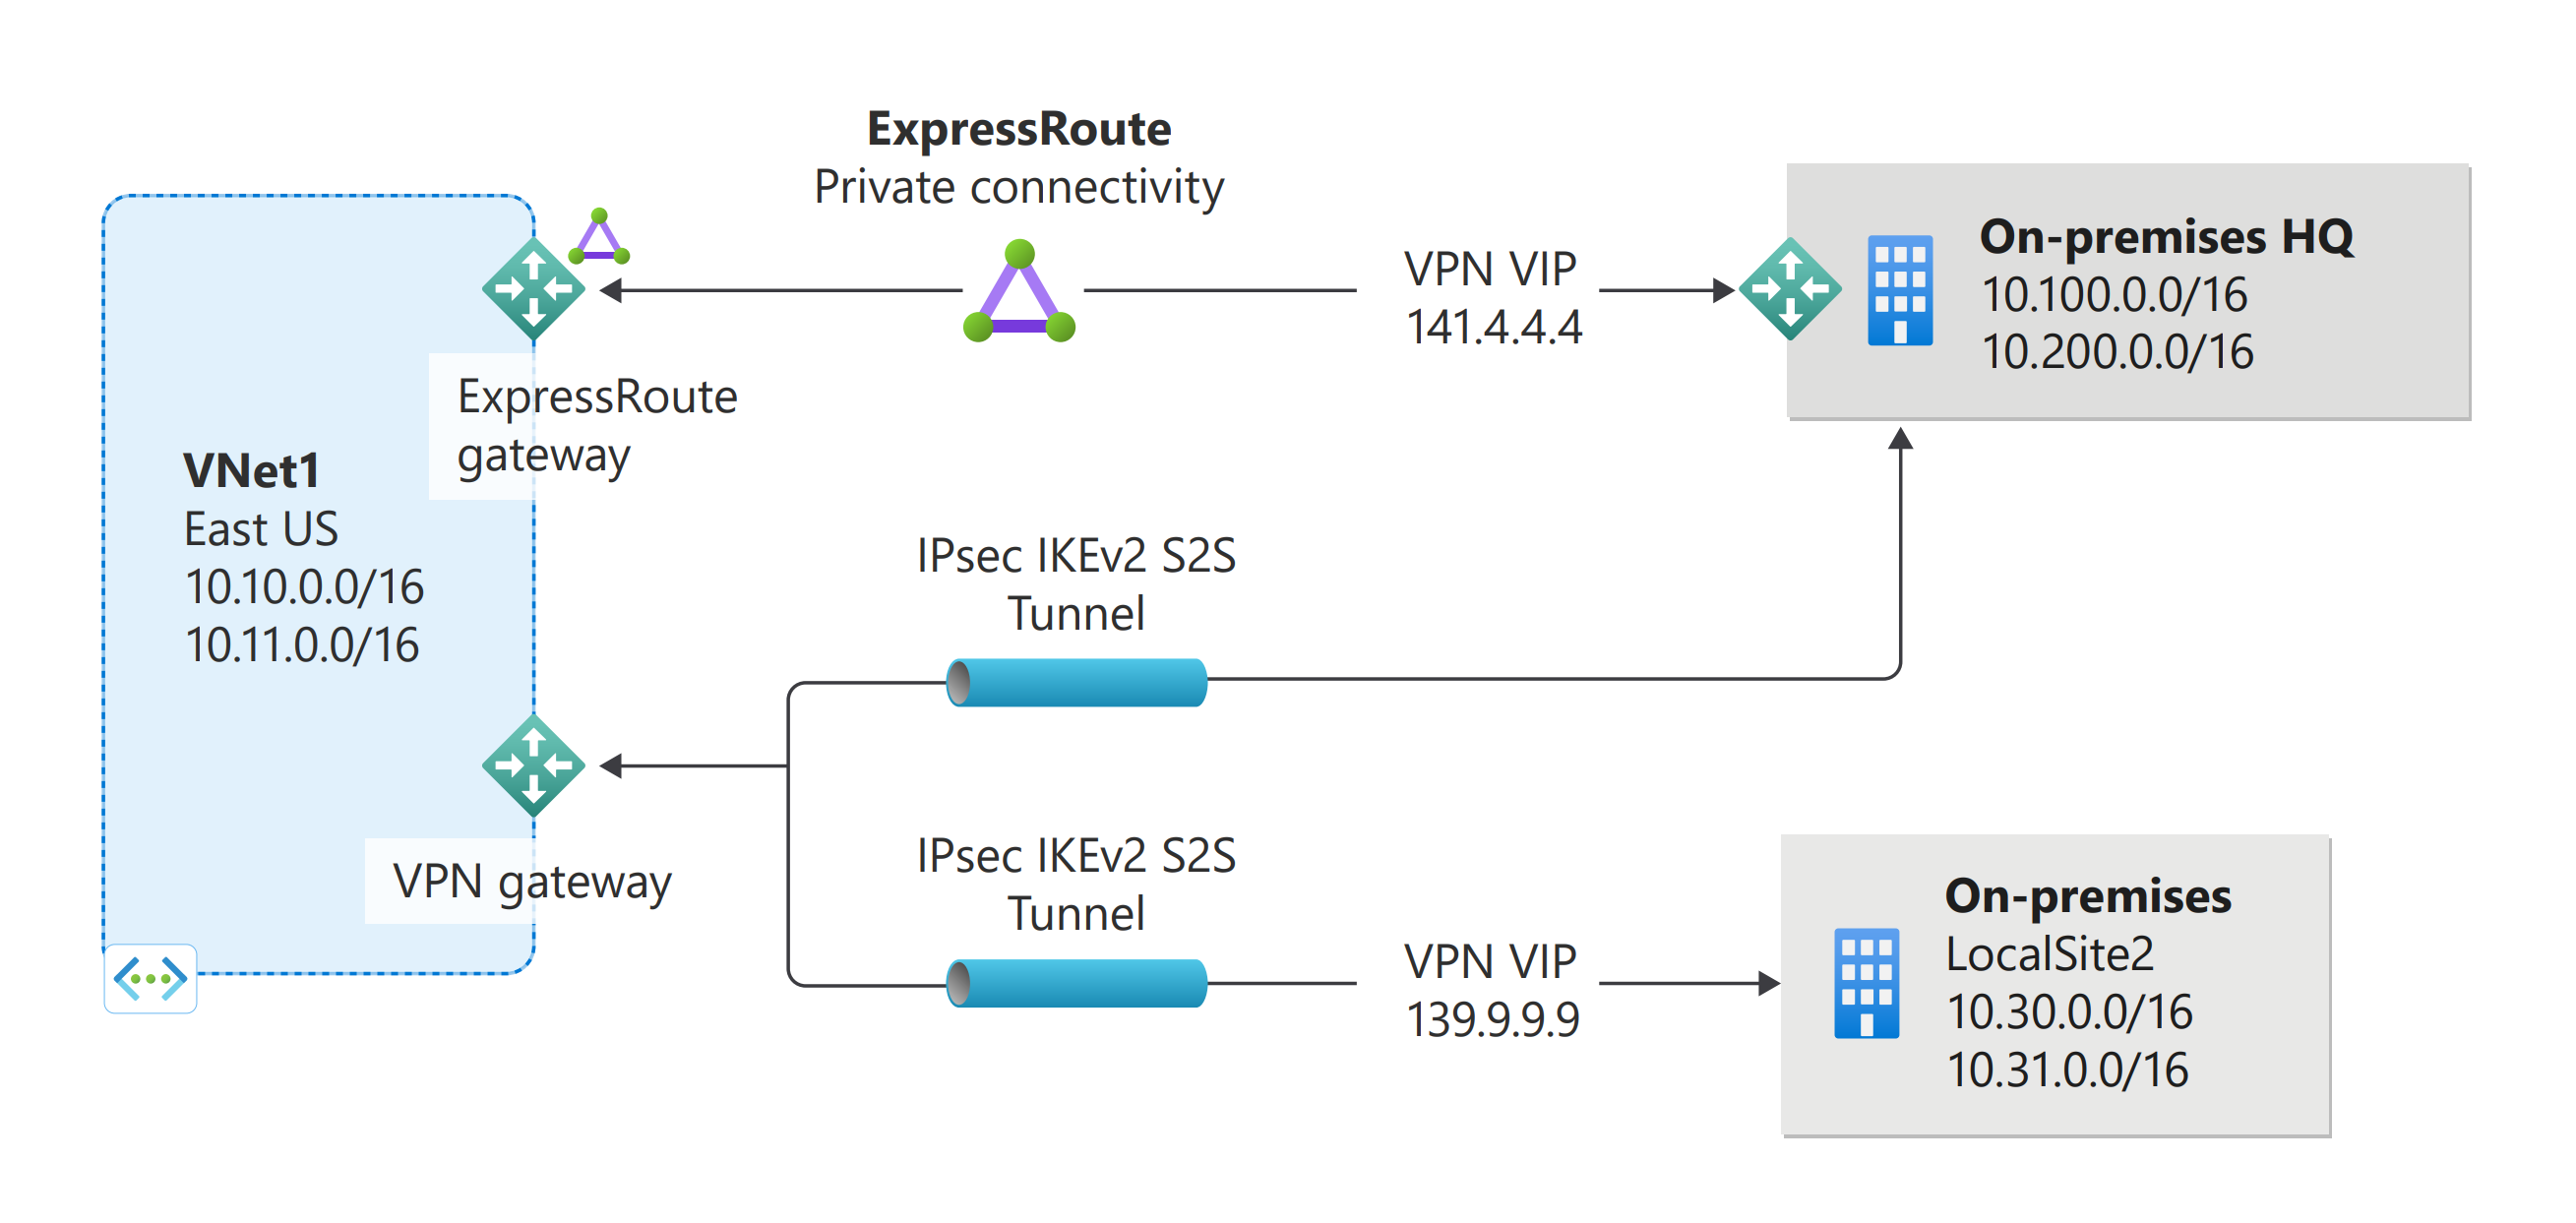 ExpressRoute and VPN Gateway coexisting connections example